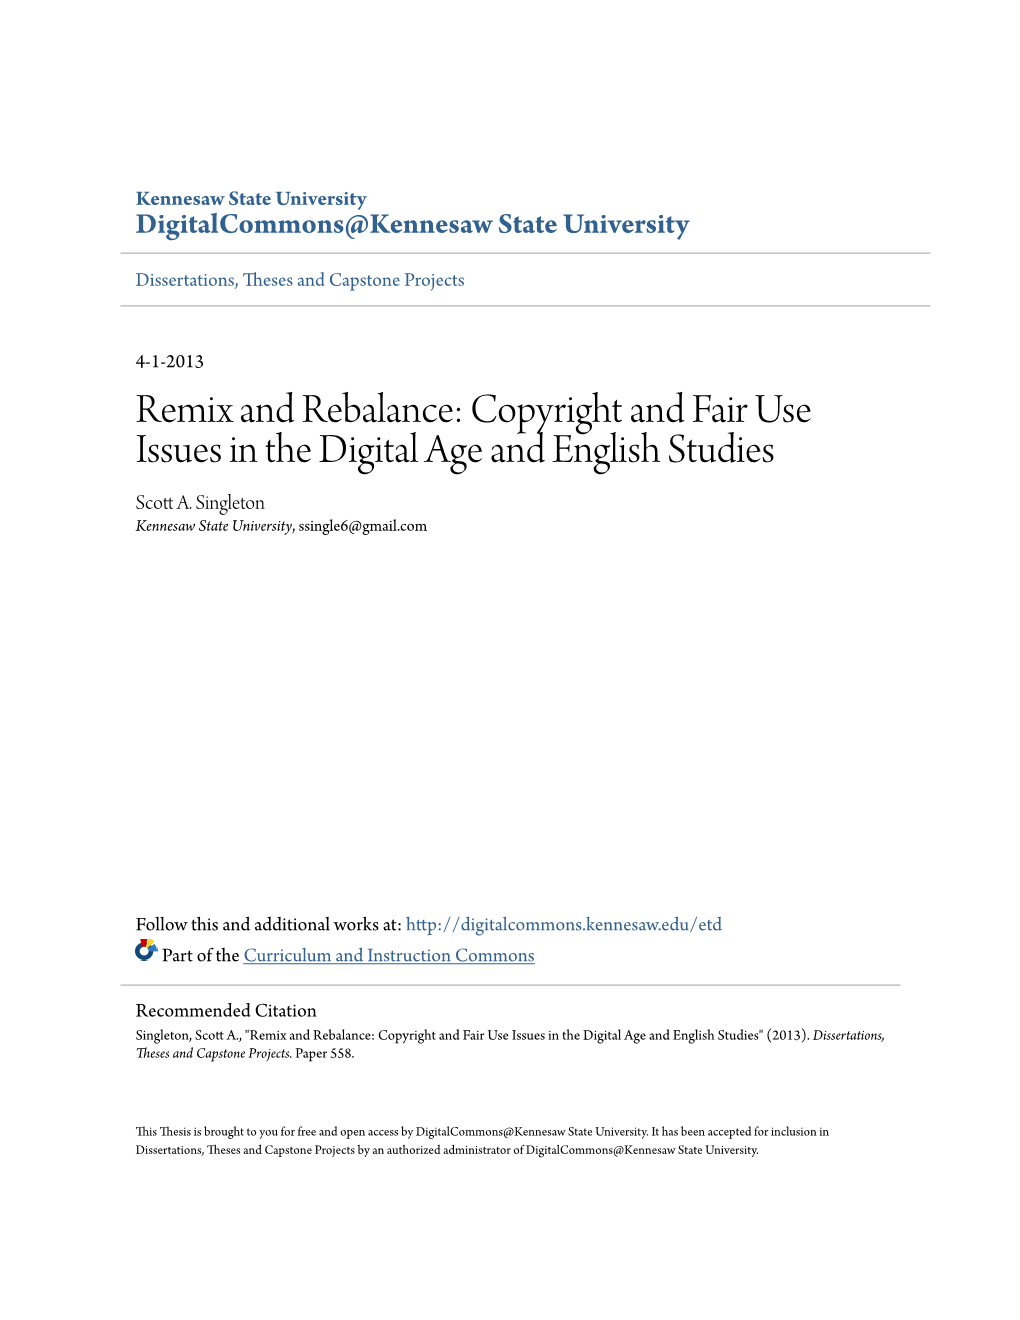 Remix and Rebalance: Copyright and Fair Use Issues in the Digital Age and English Studies Scott A